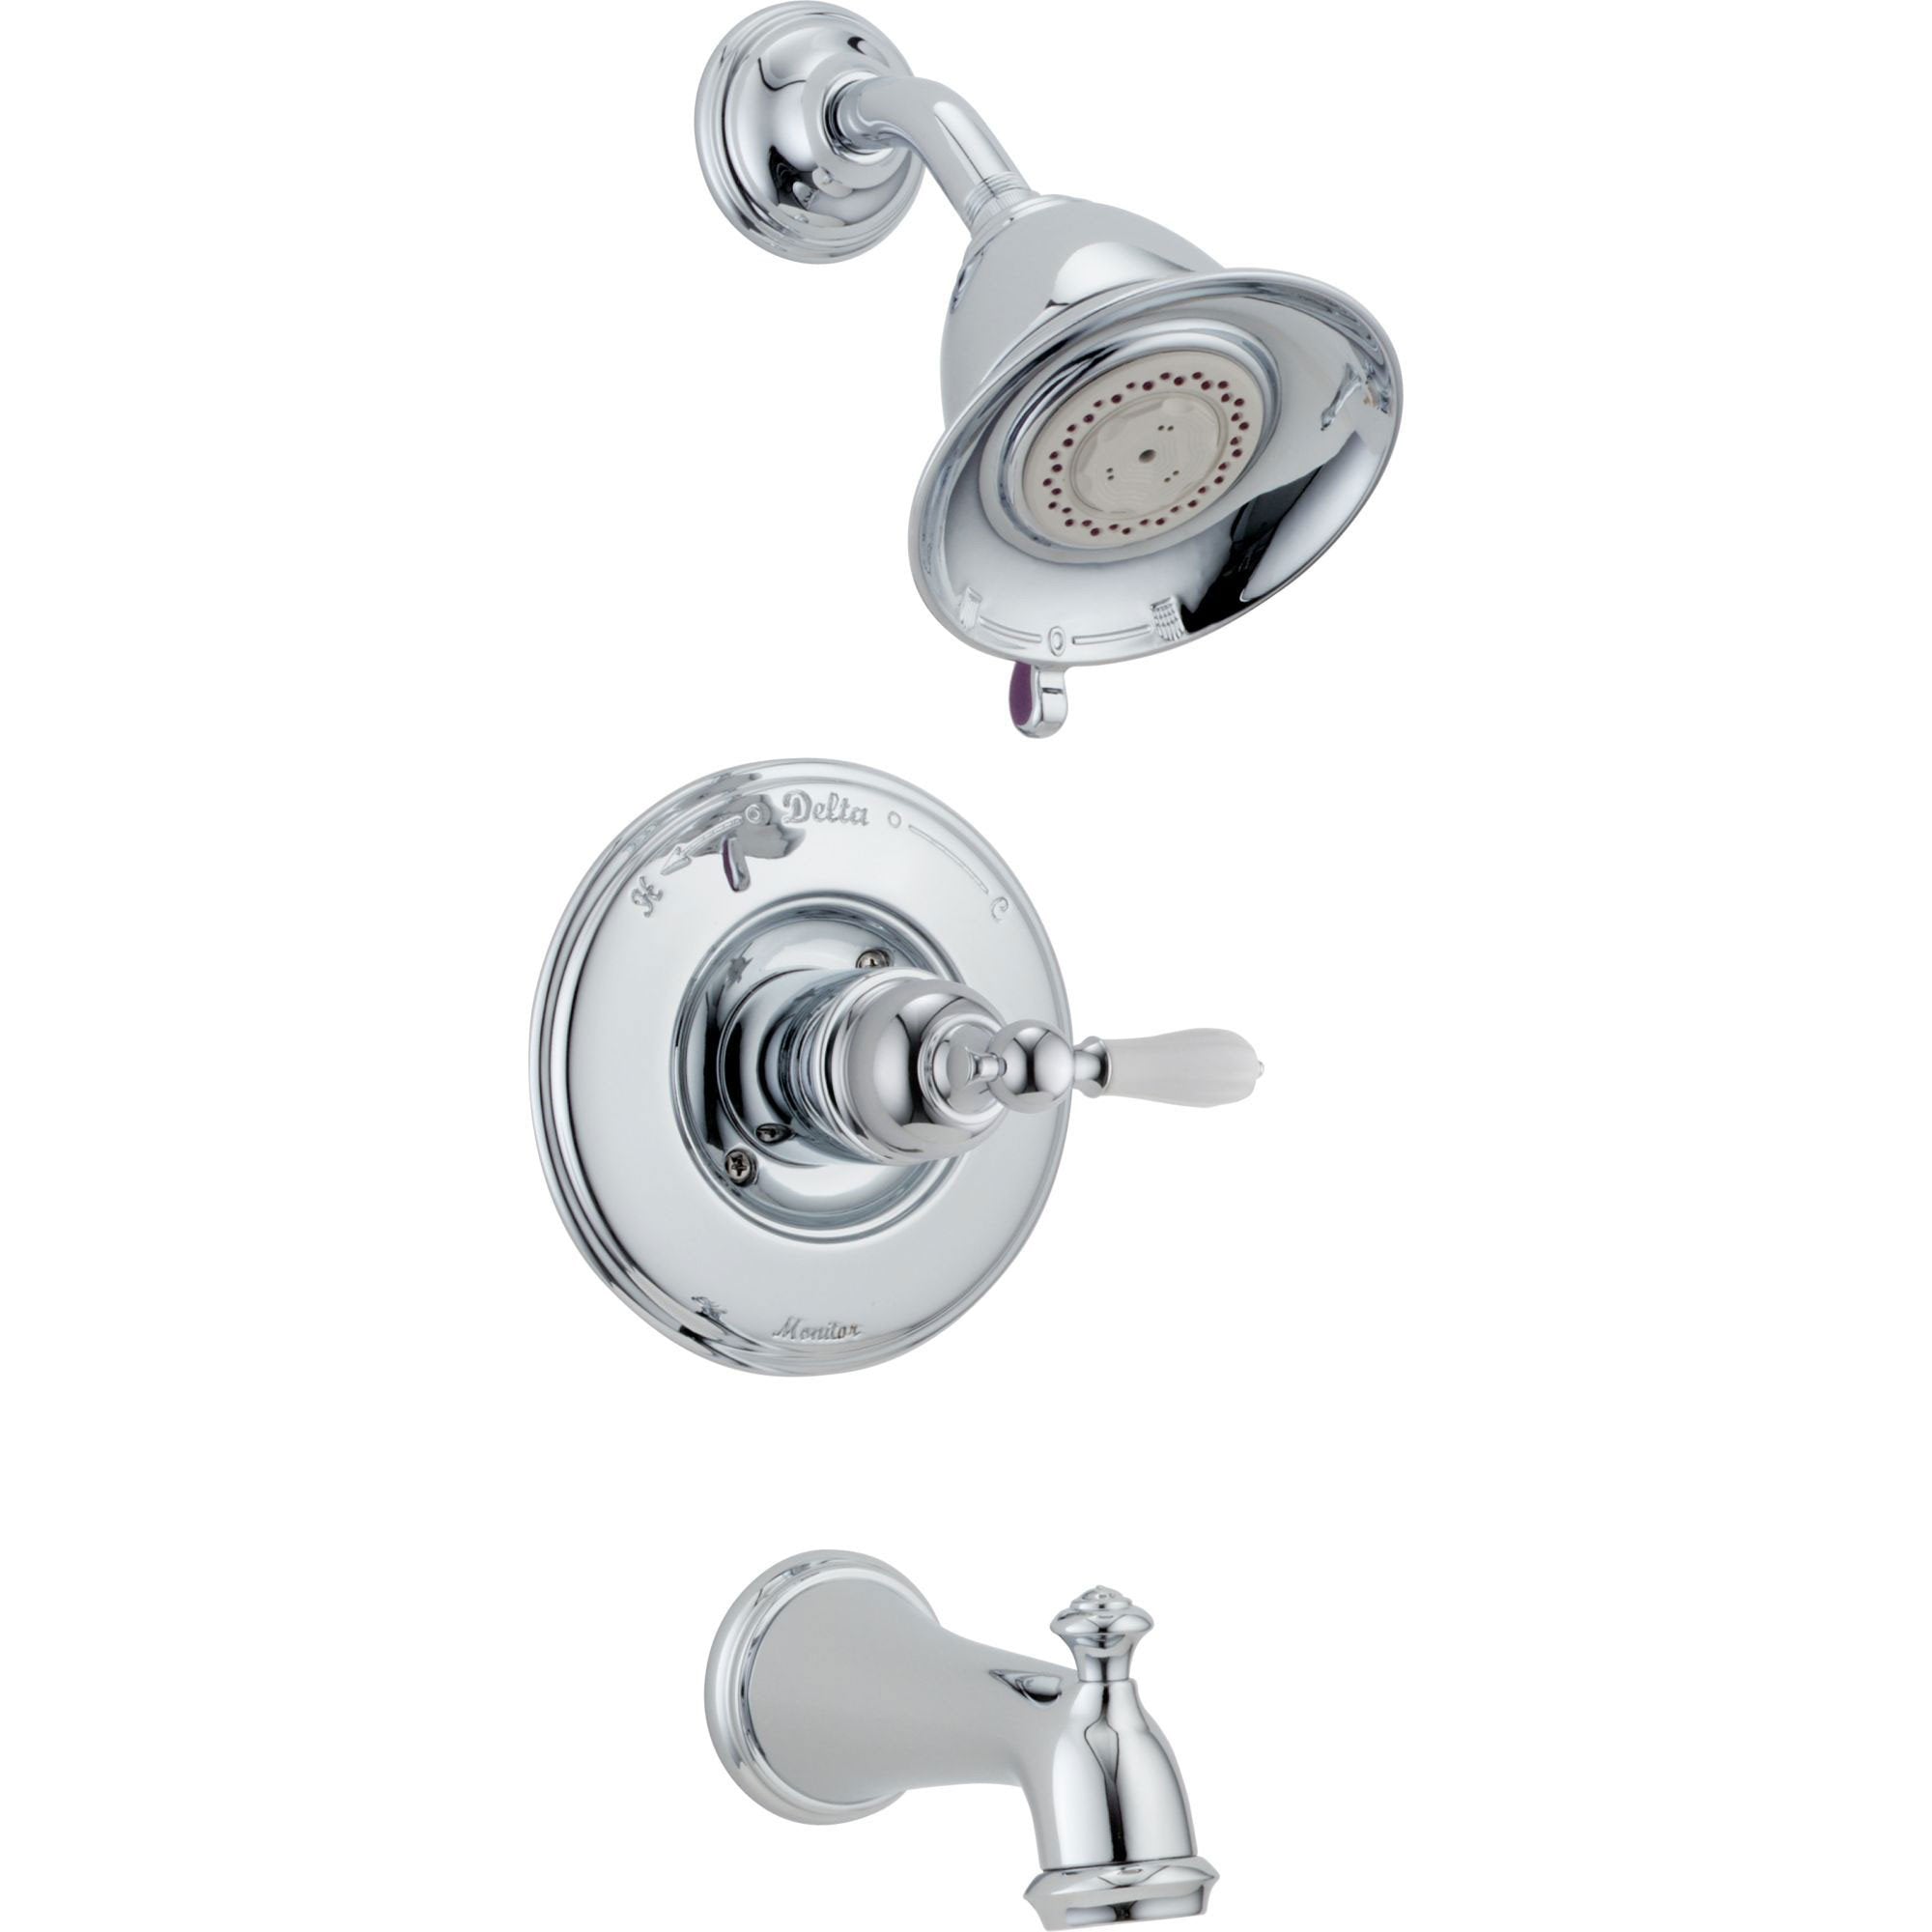 Delta Traditional Victorian Chrome Finish 14 Series Tub and Shower Faucet Combo INCLUDES Rough-in Valve and White Lever Handle D1188V